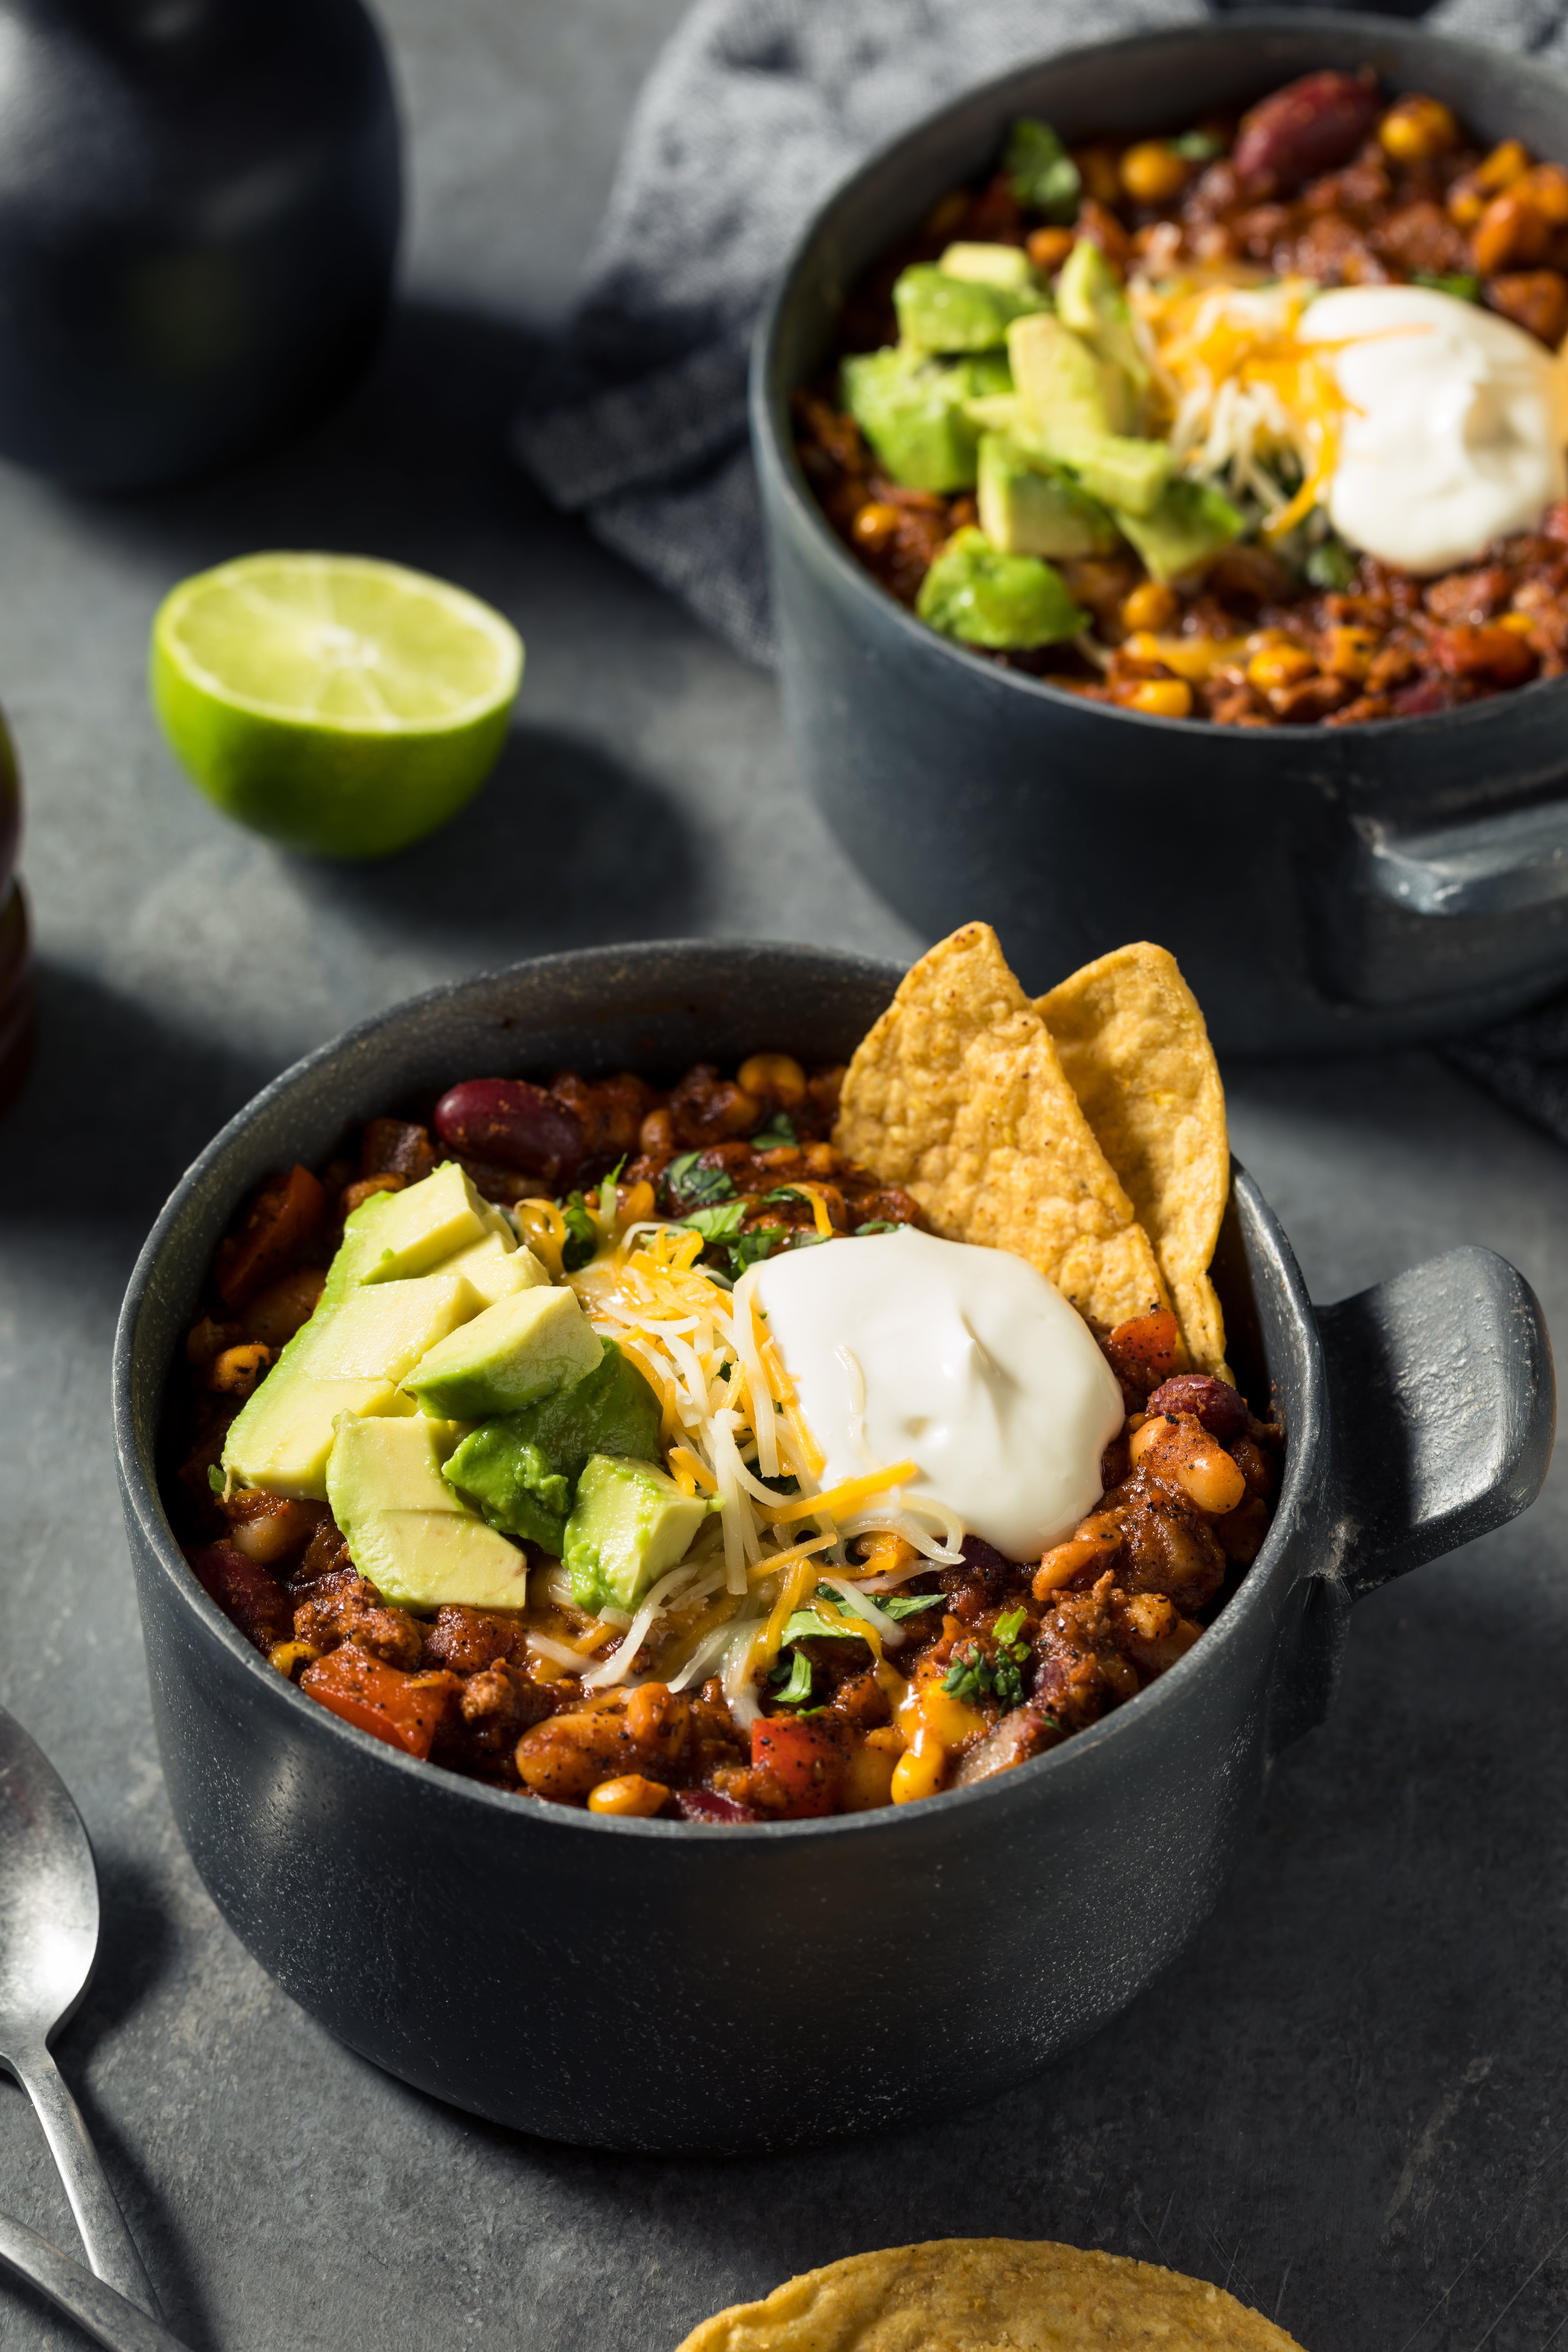 What better way to feed a big group than this hearty turkey chilli?